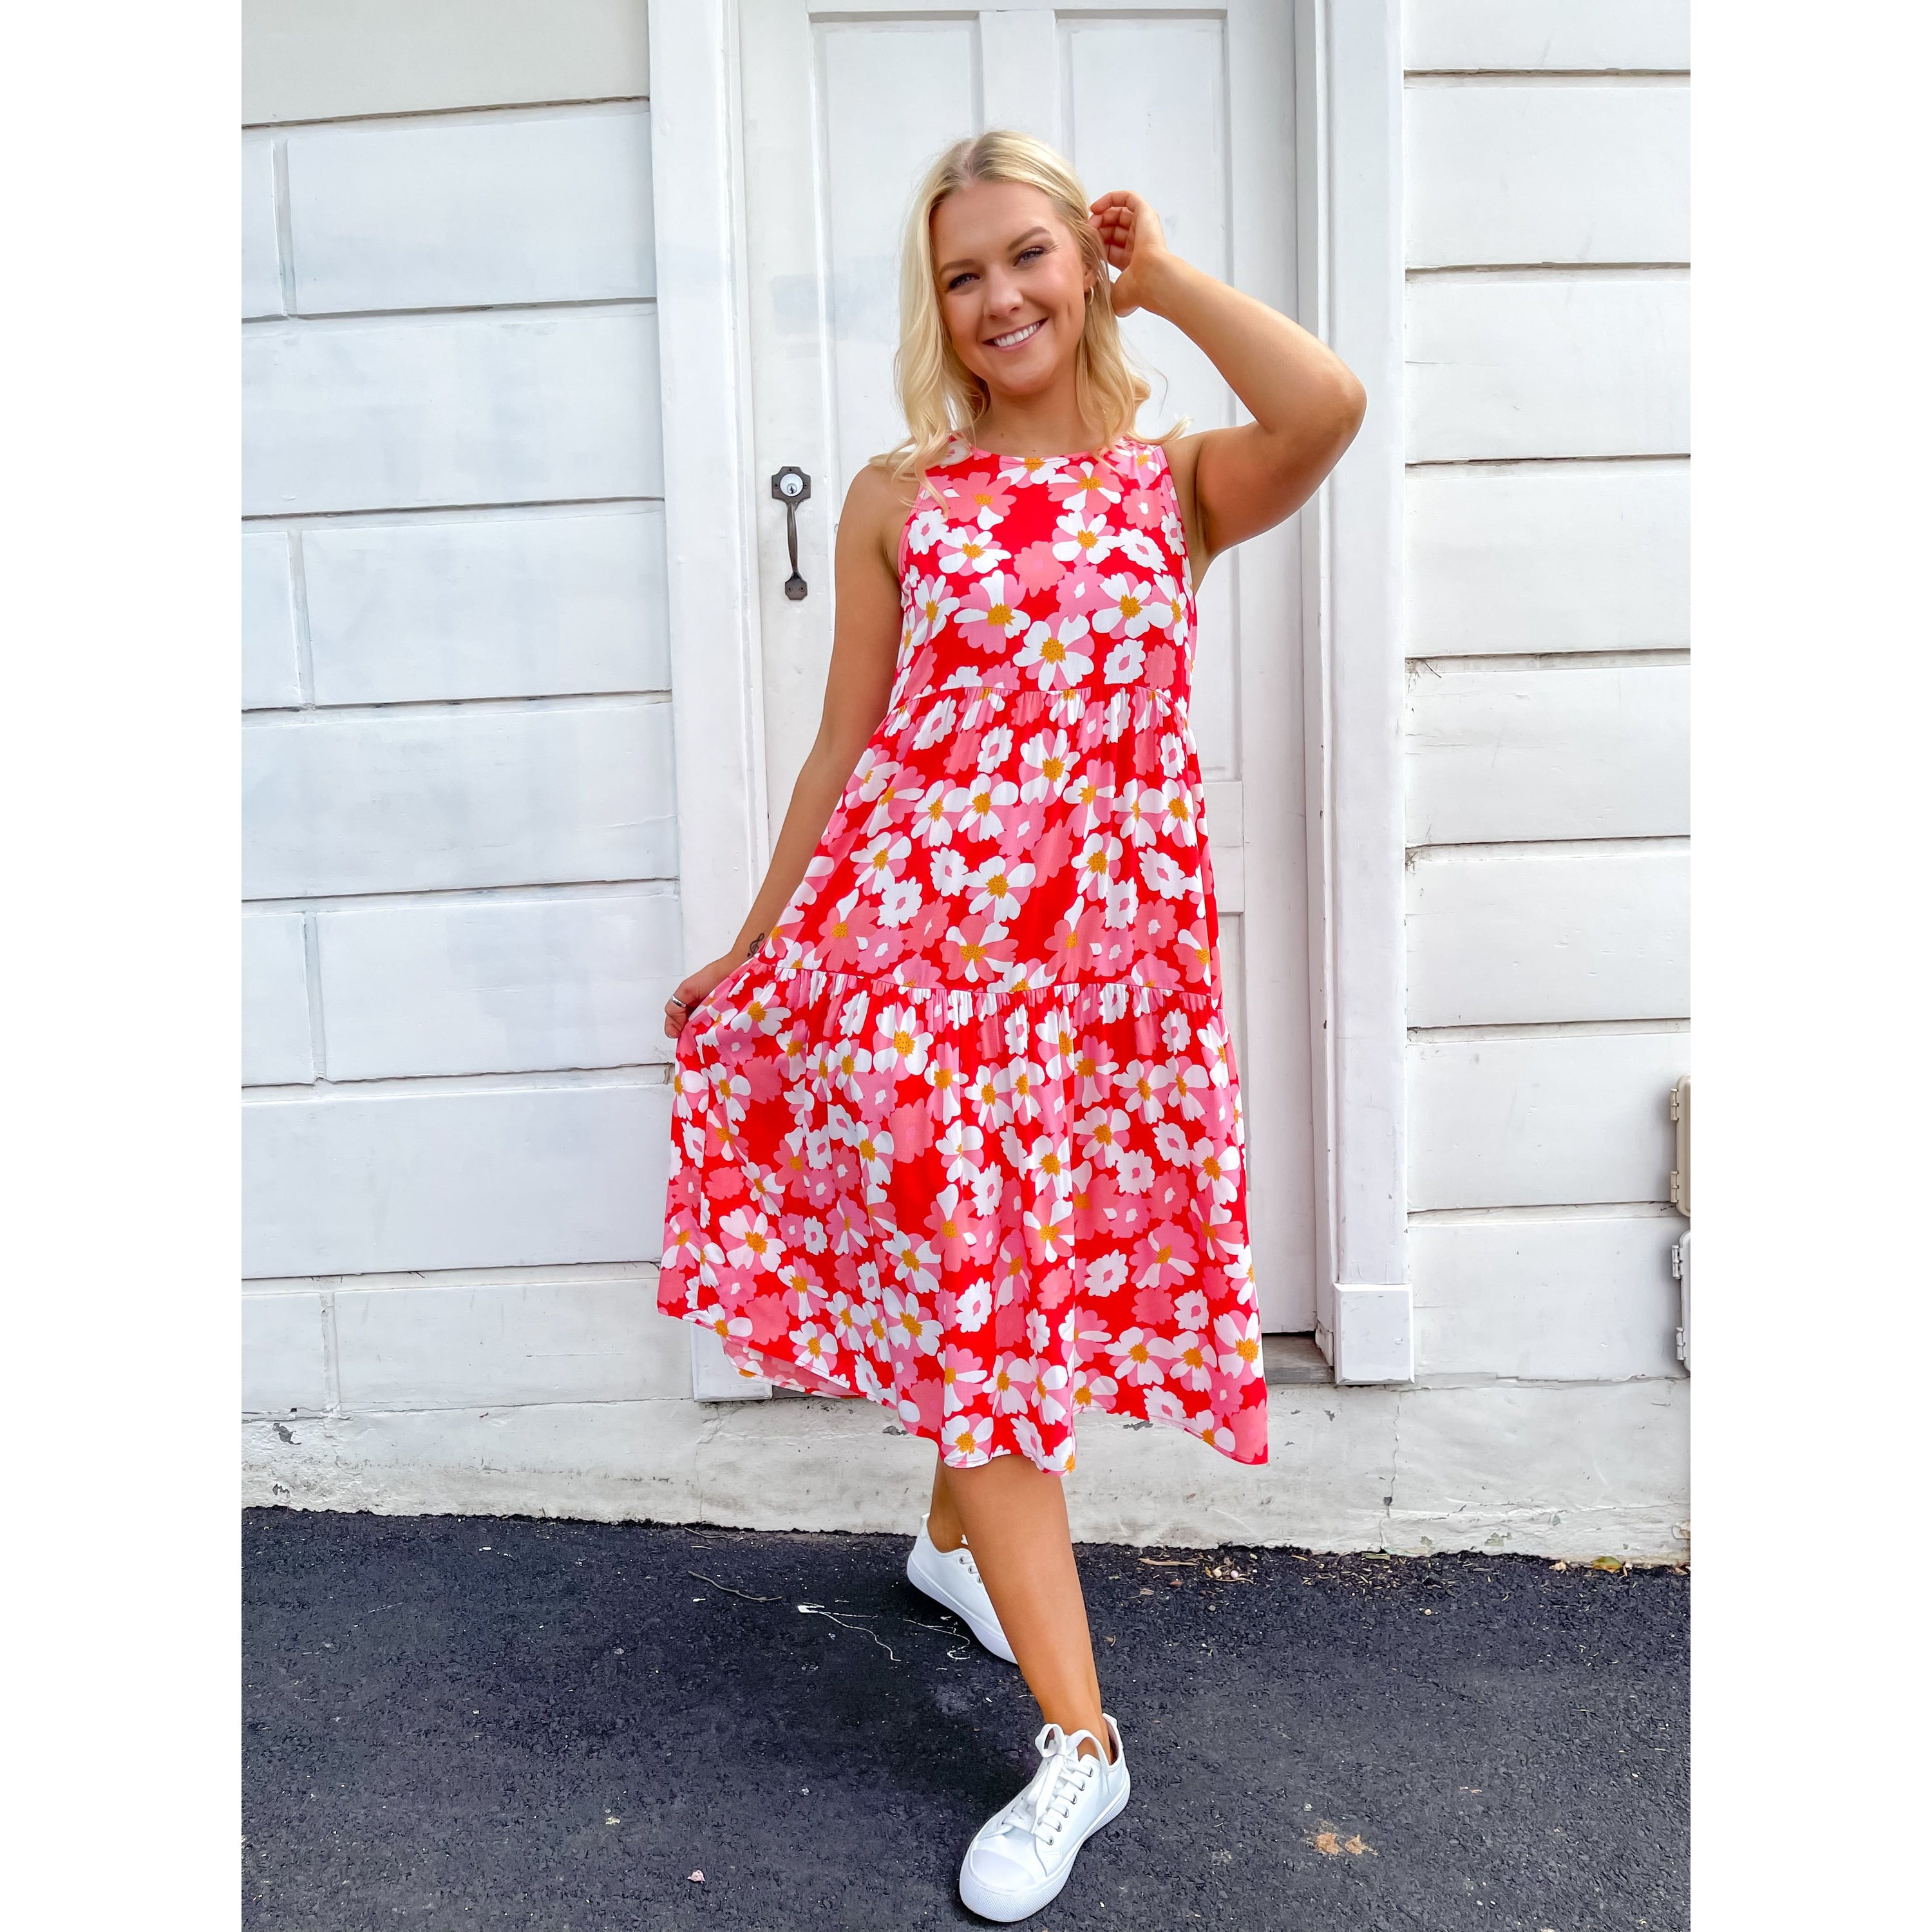 Floral Sleeveless Dress - Red